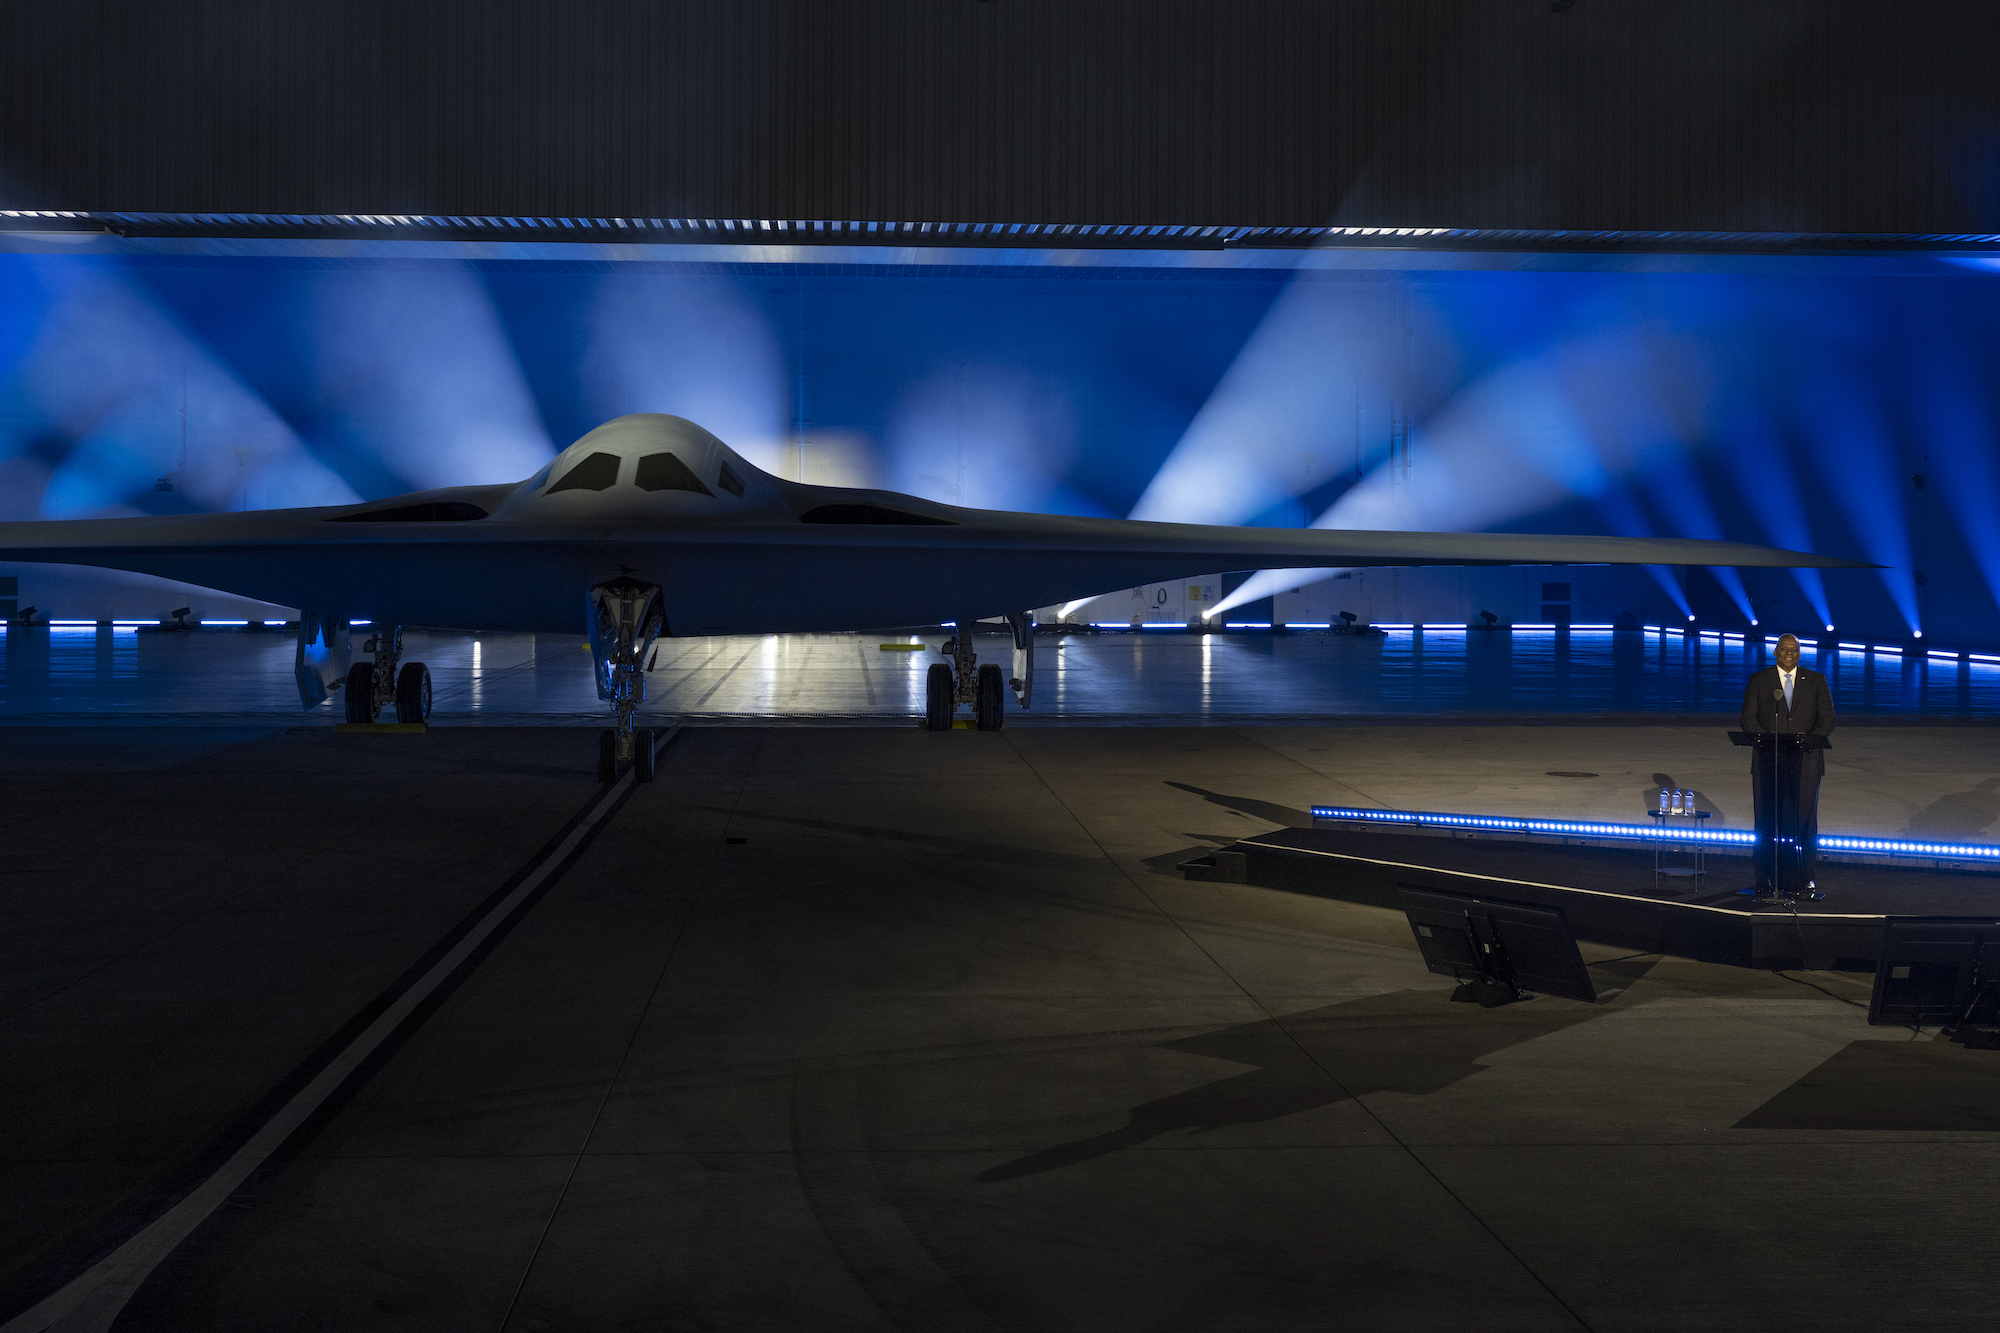 The B-21 Raider: A New Stealth Bomber Is Revealed | Popular Science